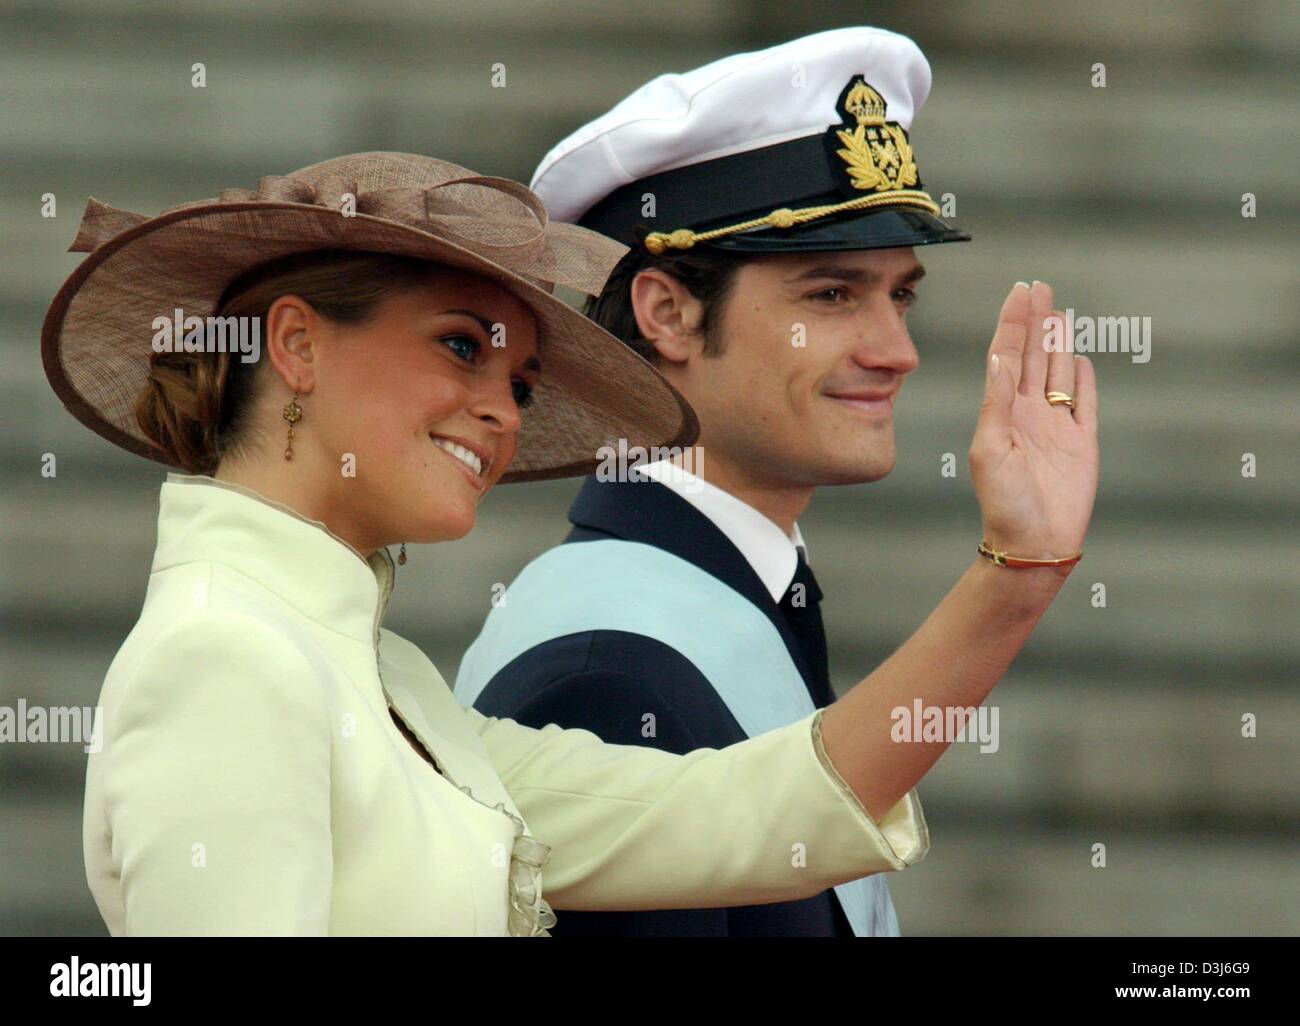 (dpa) - Princess Madeleine (L) and prince Carl Philip of Sweden smile and wave their hands as they arrive at the Almudena Cathedral for the wedding of Spanish crown prince Felipe and Letizia Ortiz in Madrid, Spain, Saturday 22 May 2004. Stock Photo